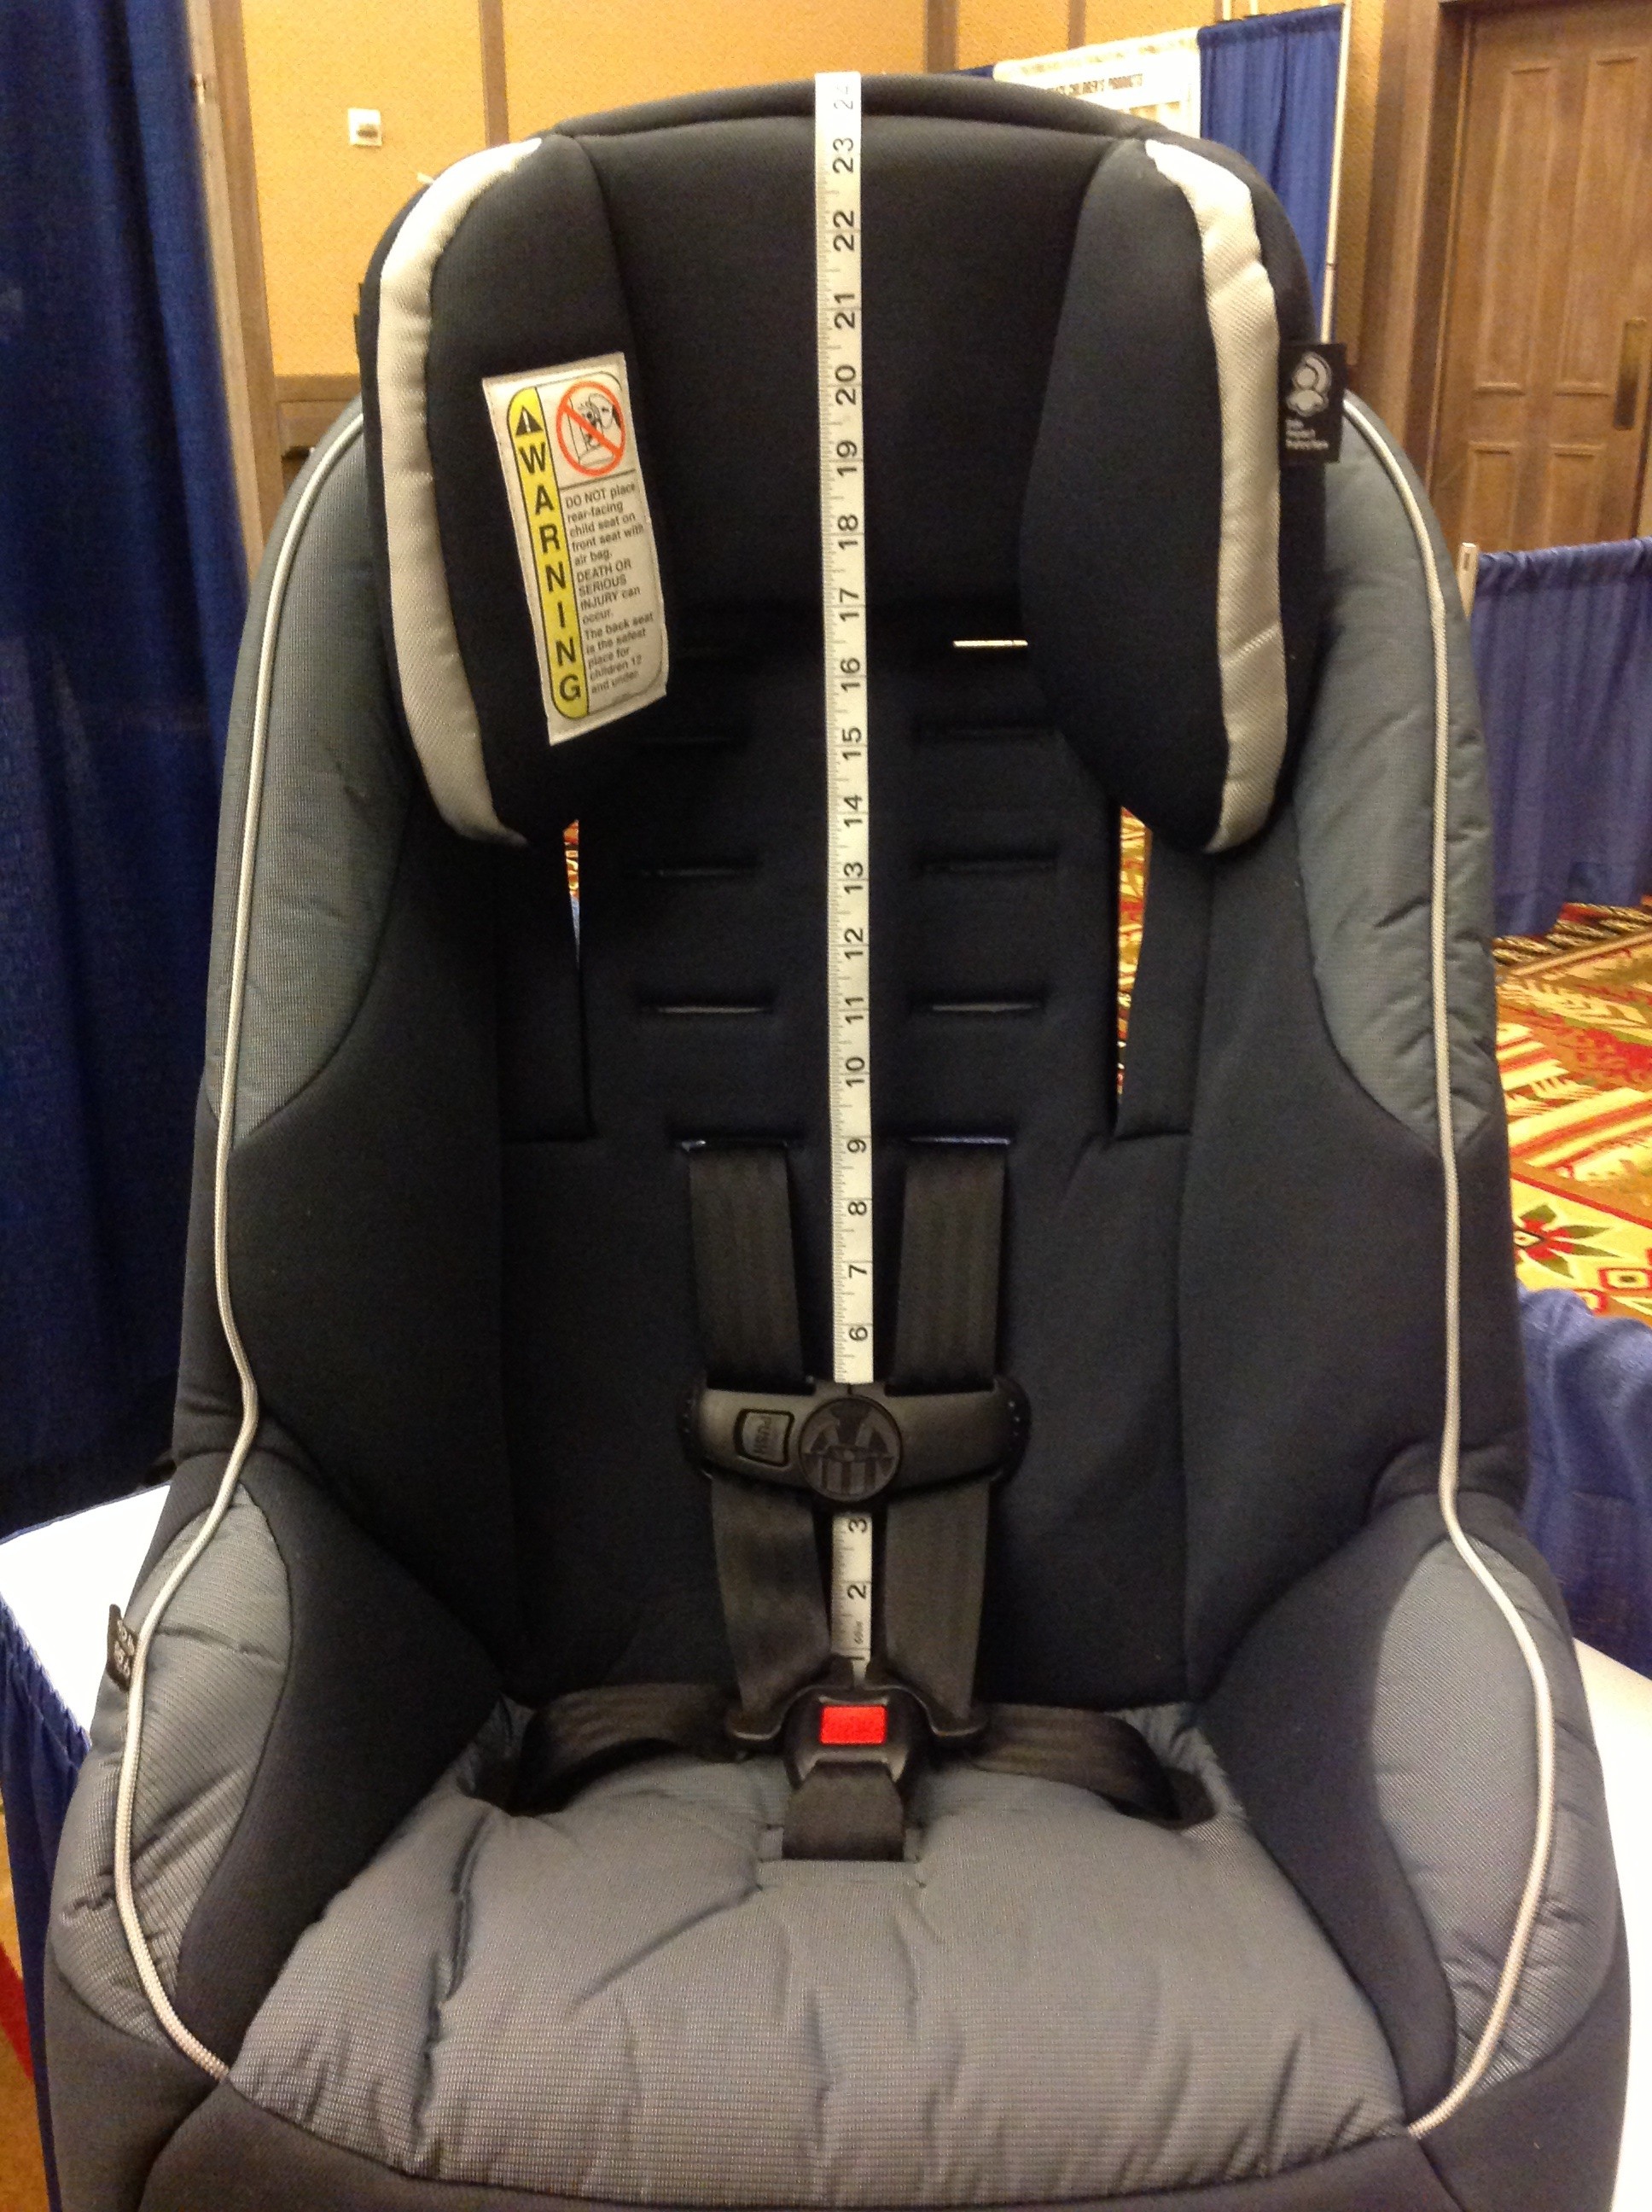 Rear Facing Convertible Seats Measurements Height Limits Weight Catblog - Do Car Seat Weight Limits Include The